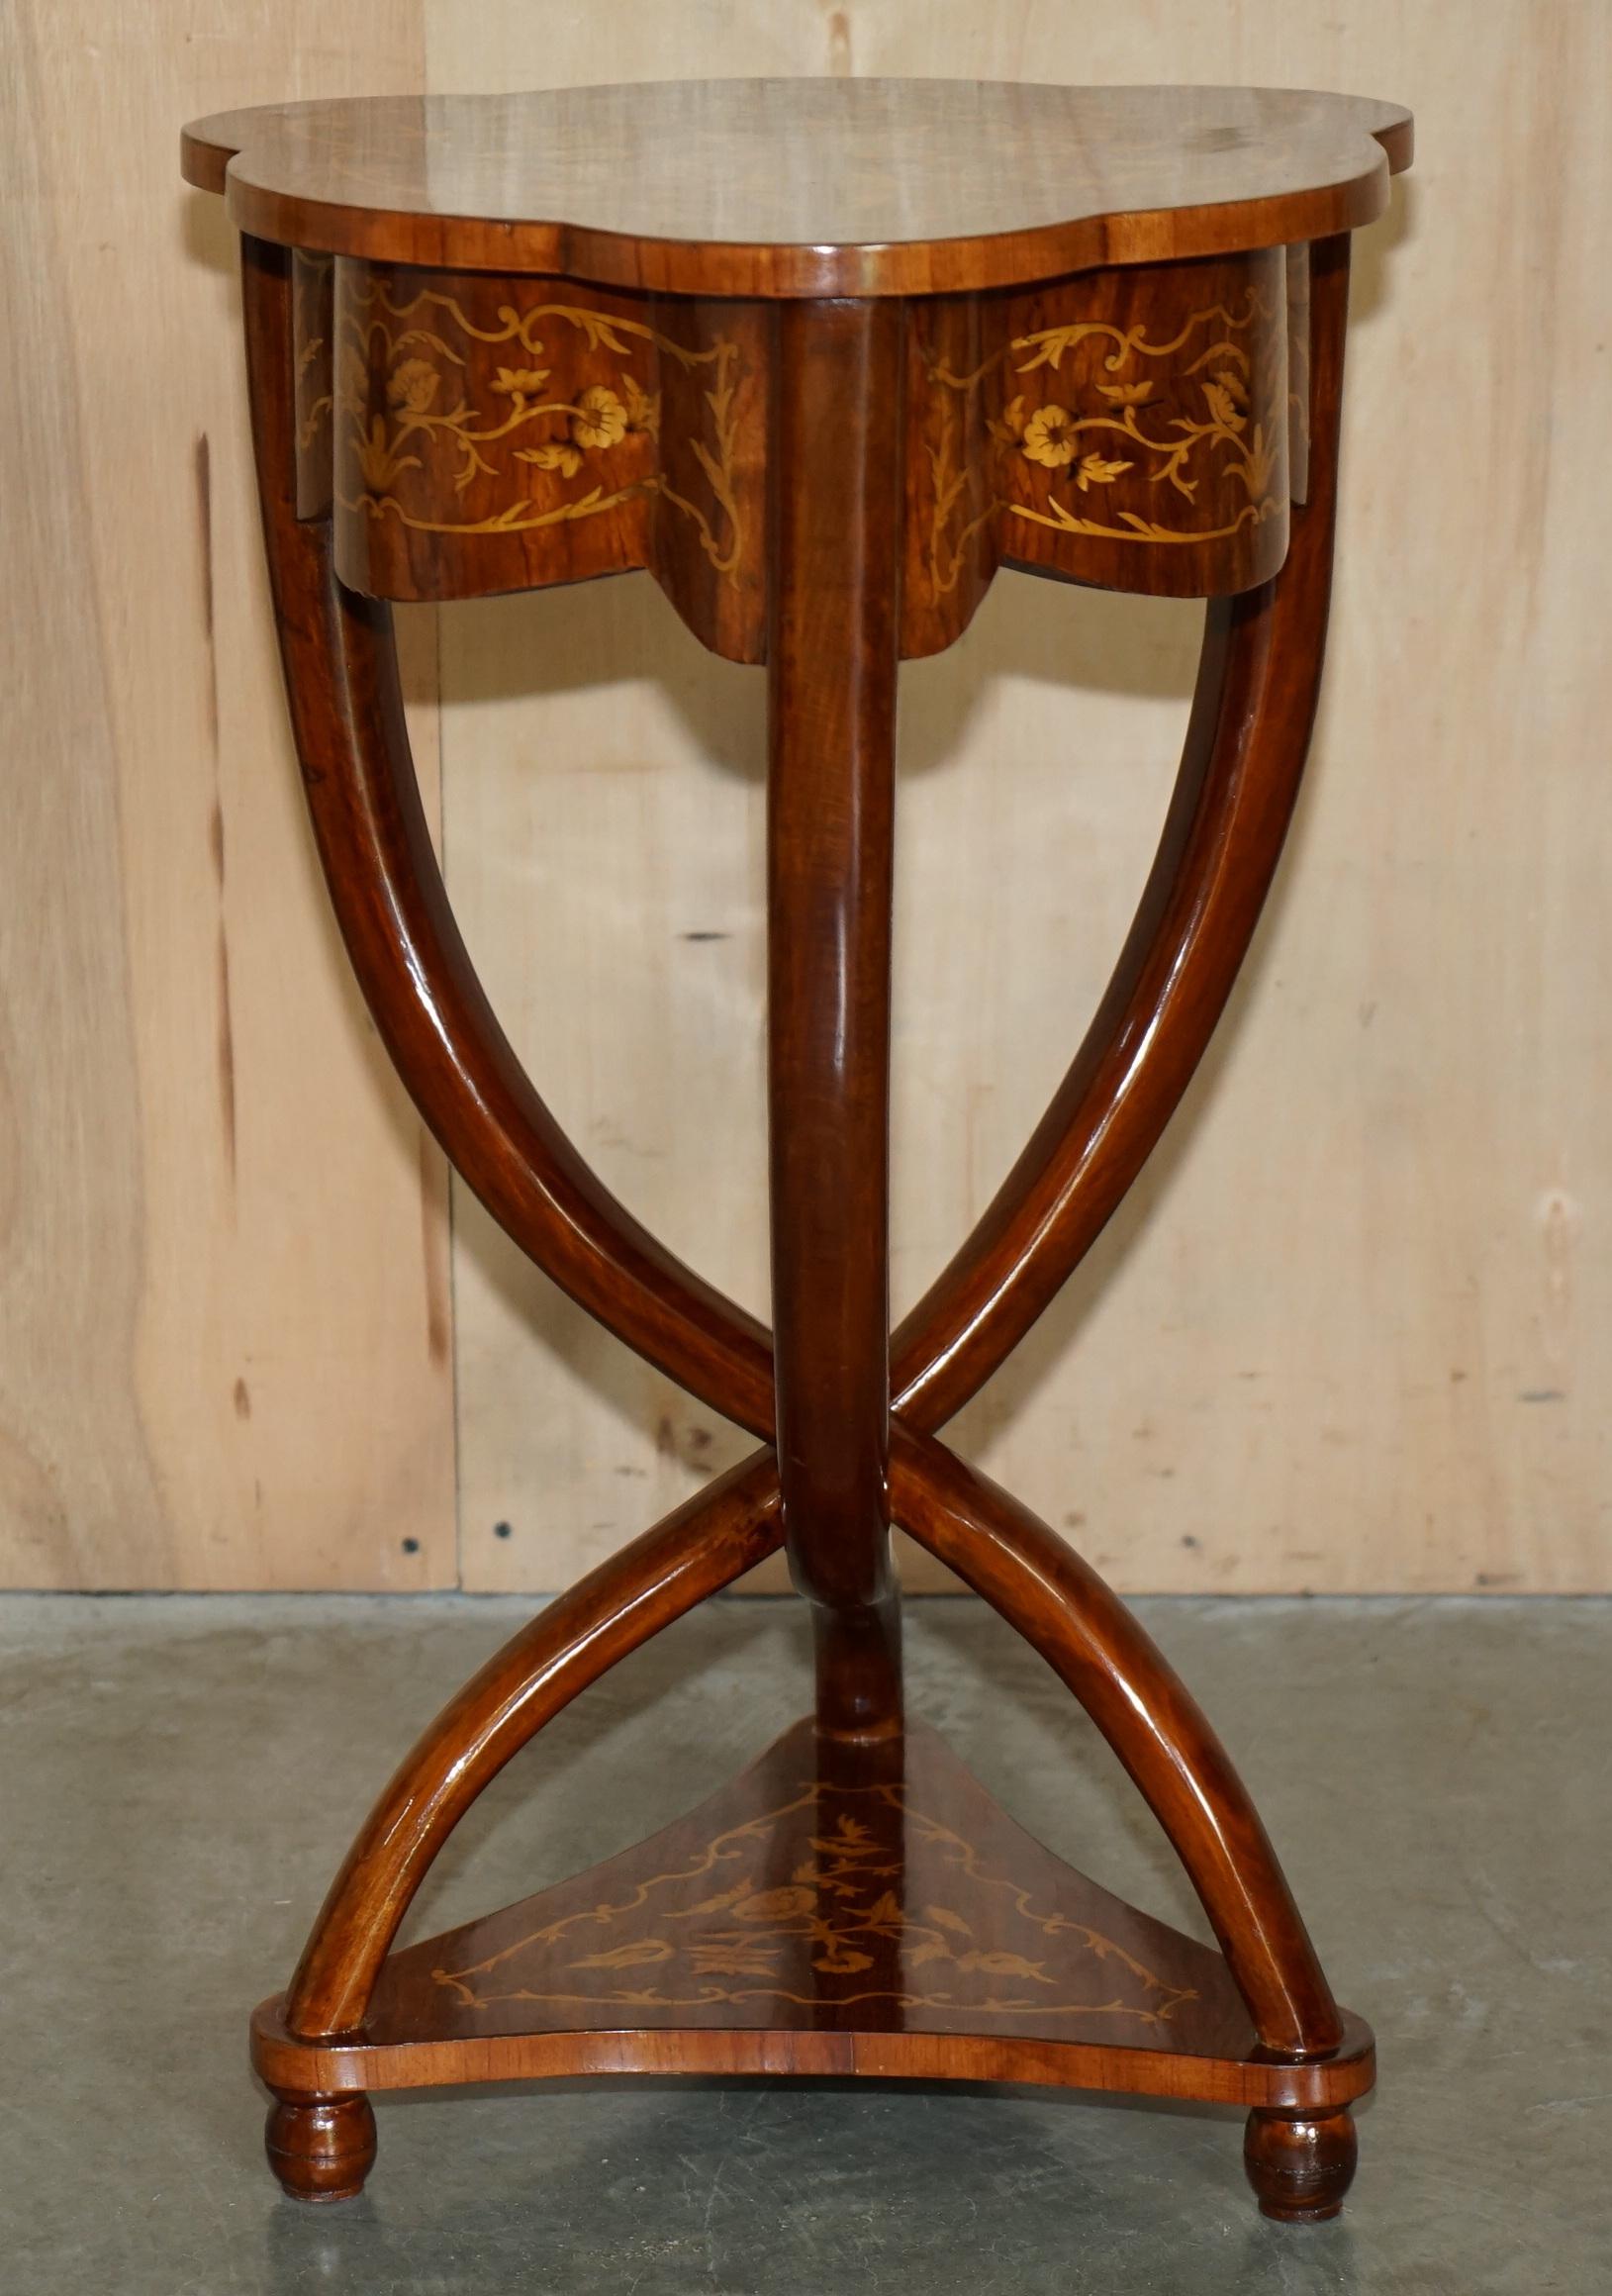 PAIR OF ART DECO STYLE SYCAMORE WOOD & WALNUT INLAID PEDESTAL SIDE END TABLEs For Sale 7